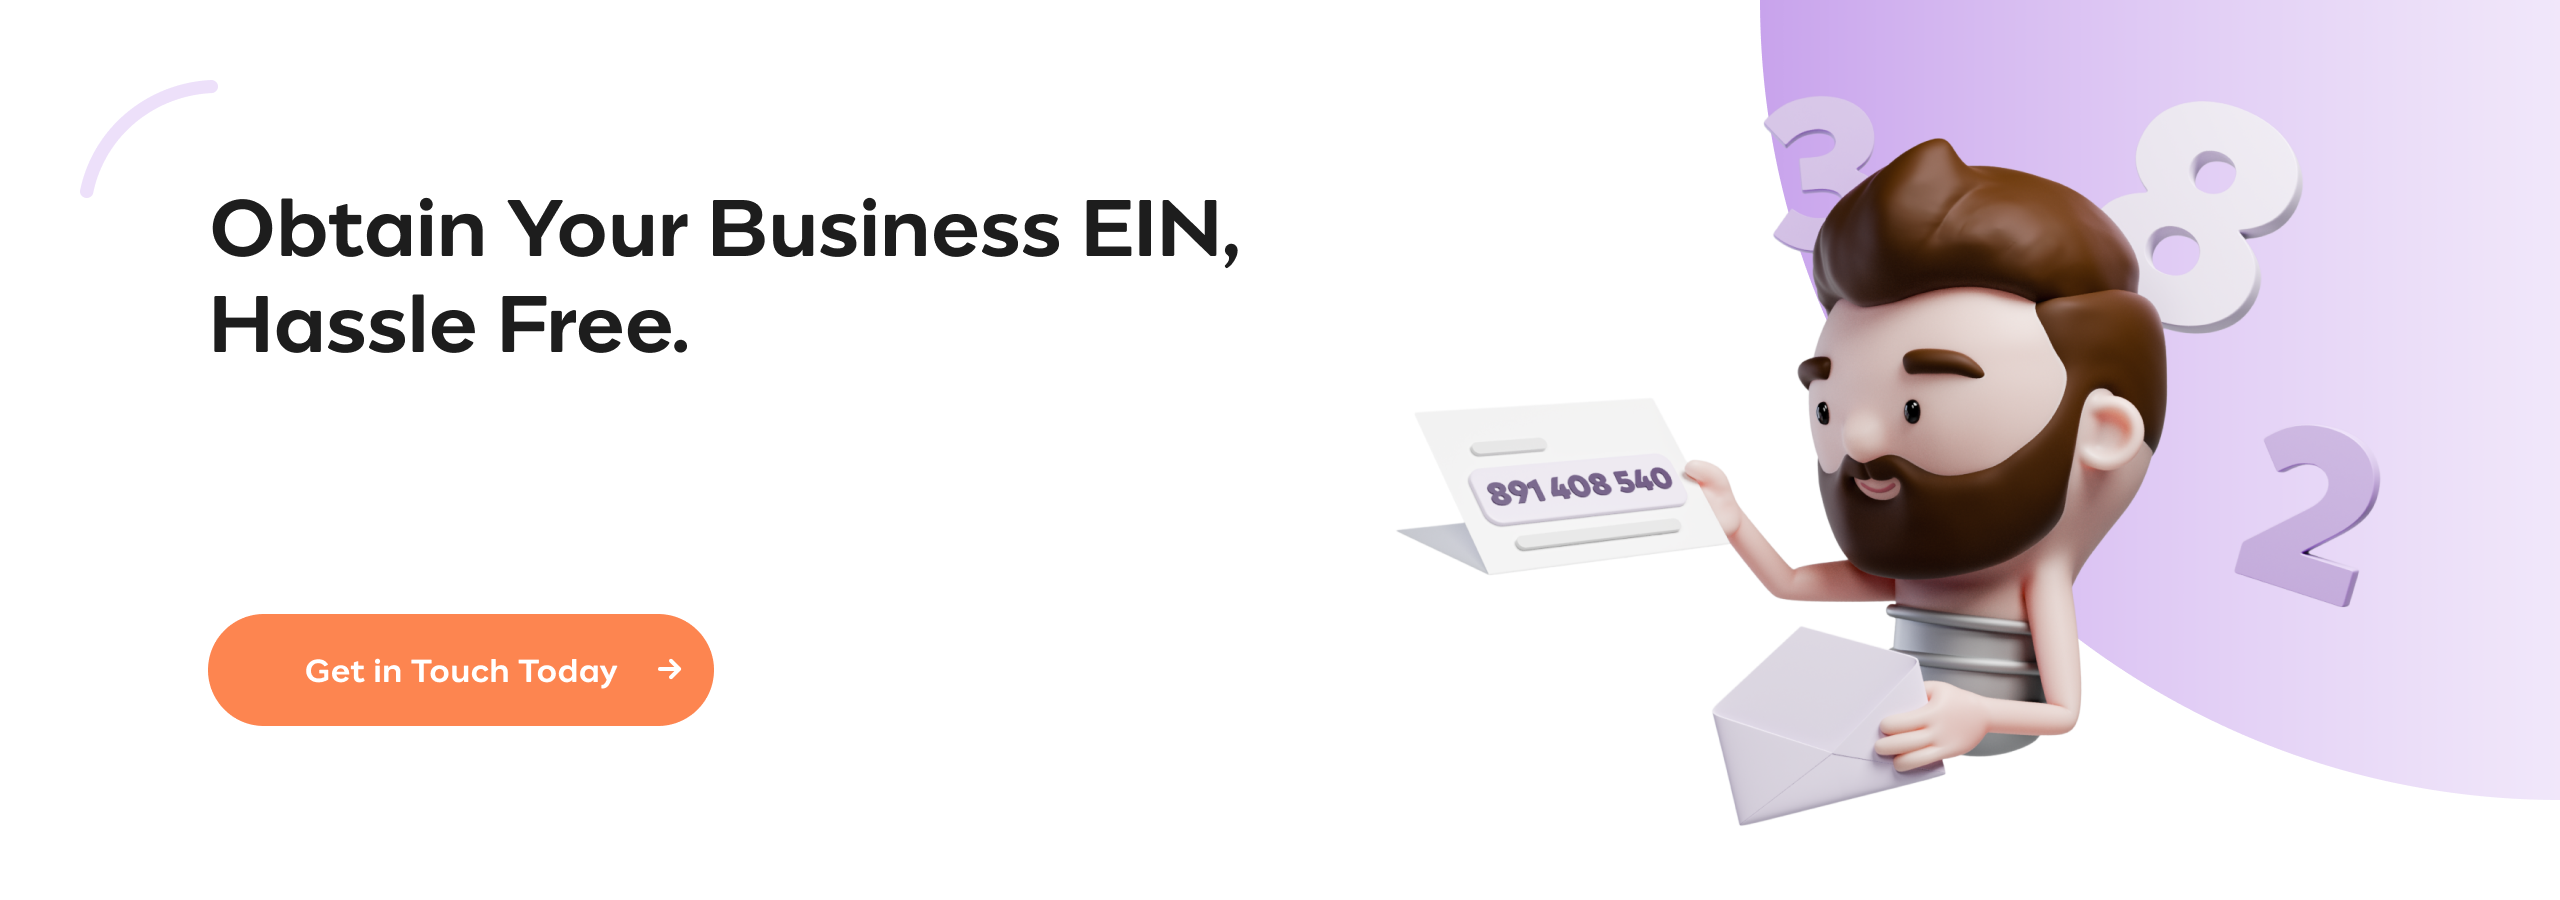 Obtain Your Business EIN, Hassle Free.